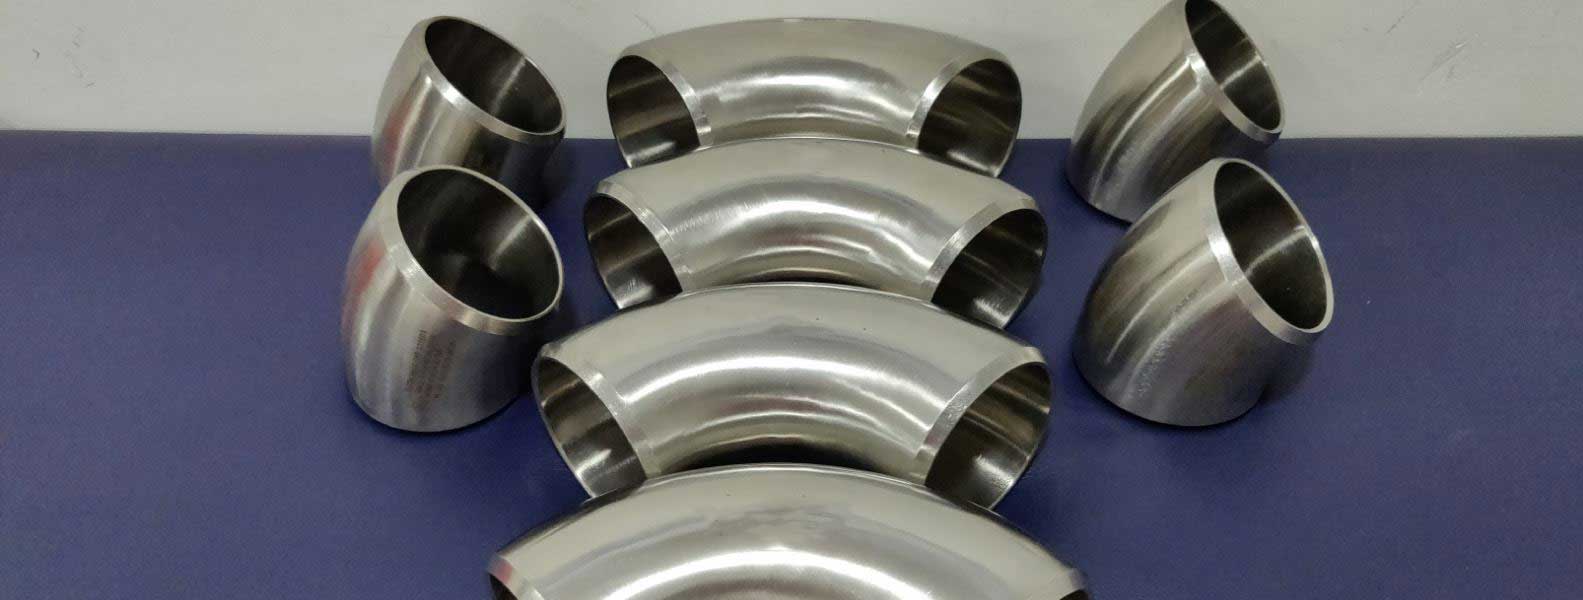 pipe-fittings-manufacturer